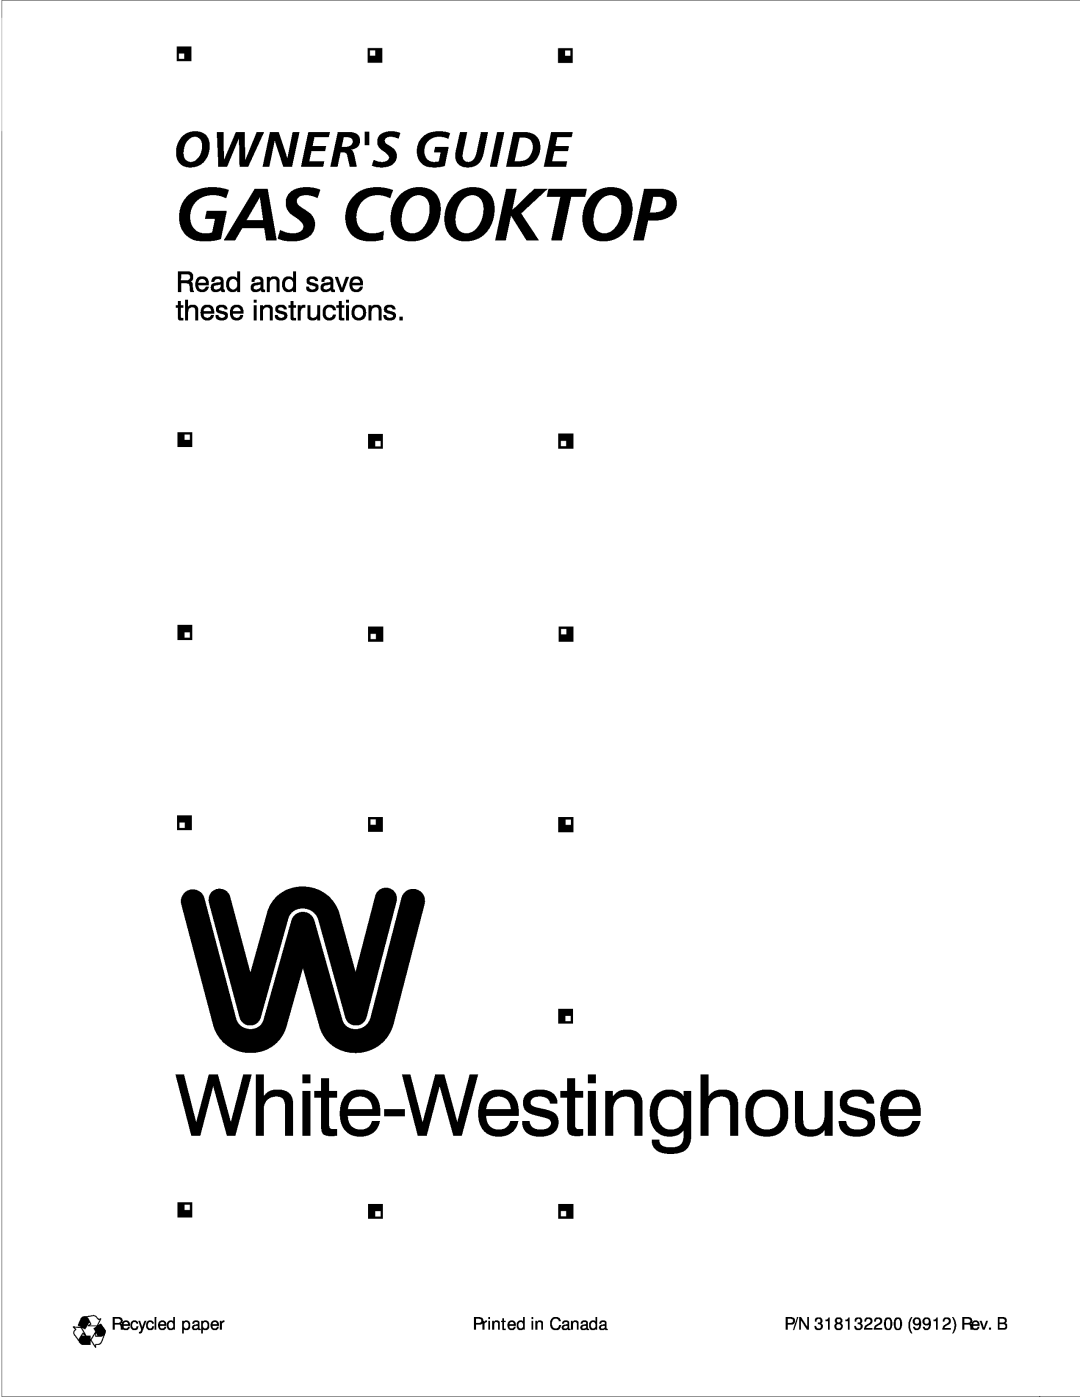 White-Westinghouse manual Recycled paper, Printed in Canada, P/N 318132200 9912 Rev. B 